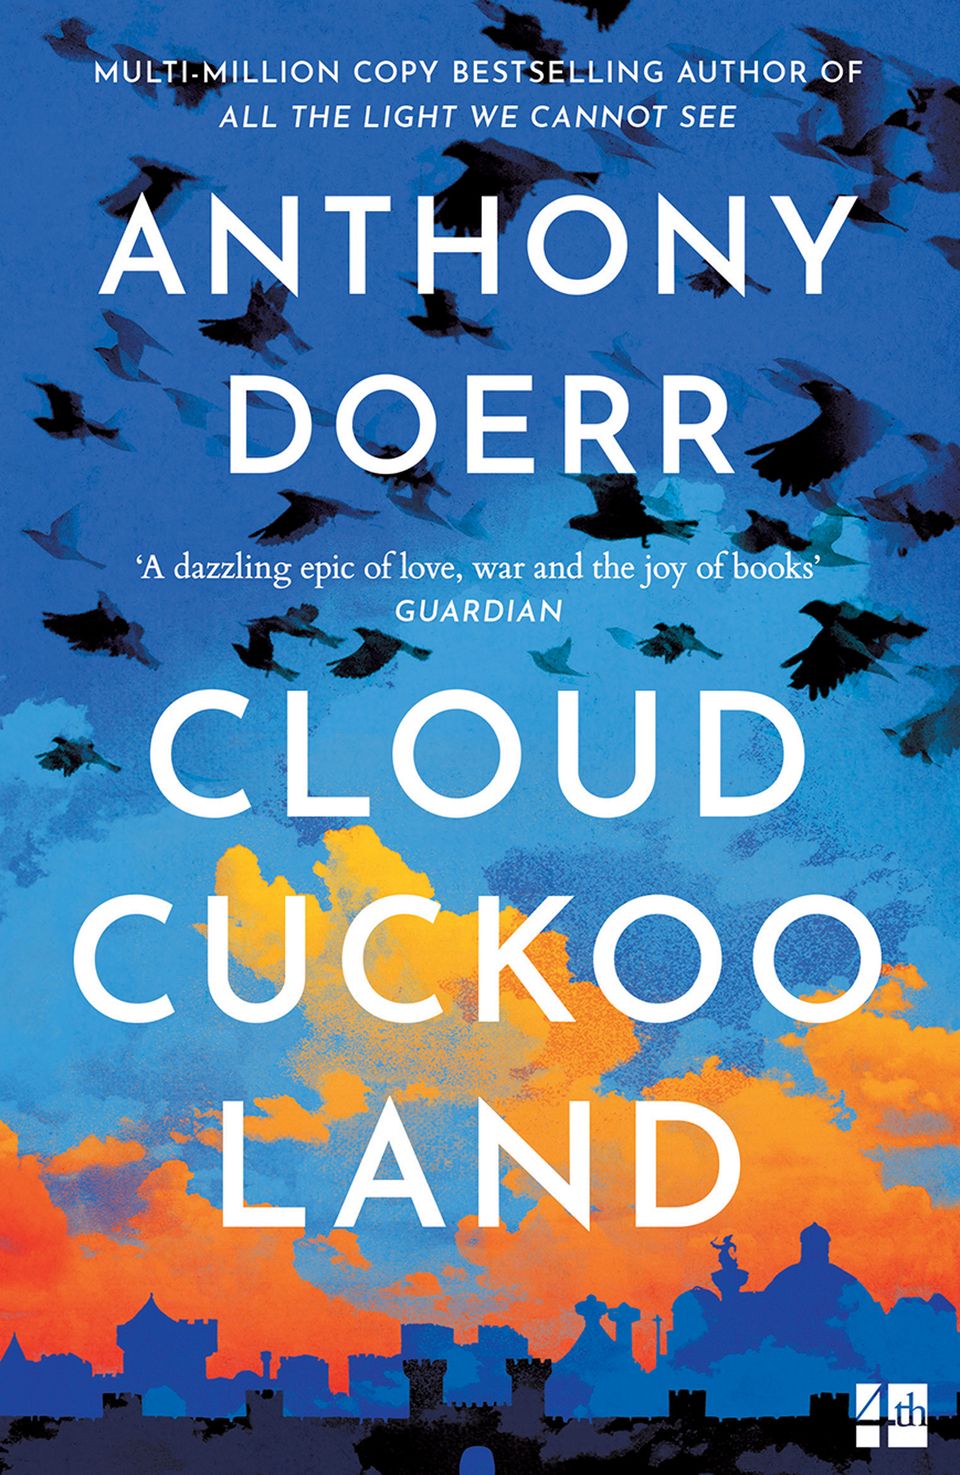 synopsis of cloud cuckoo land